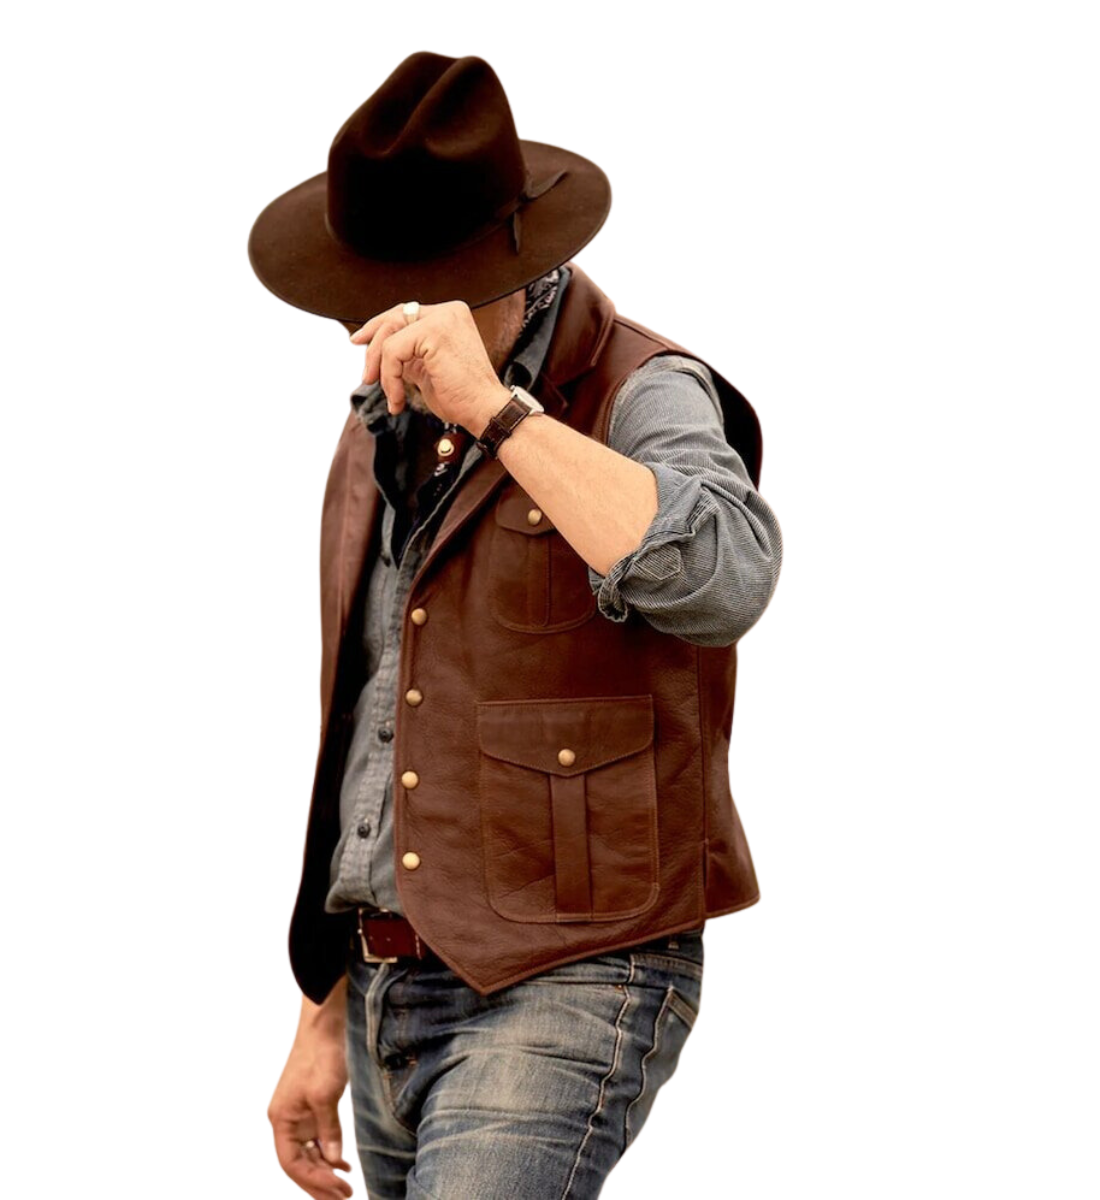 Authentic Western Style: Men's Cowhide Leather Sleeveless Vest